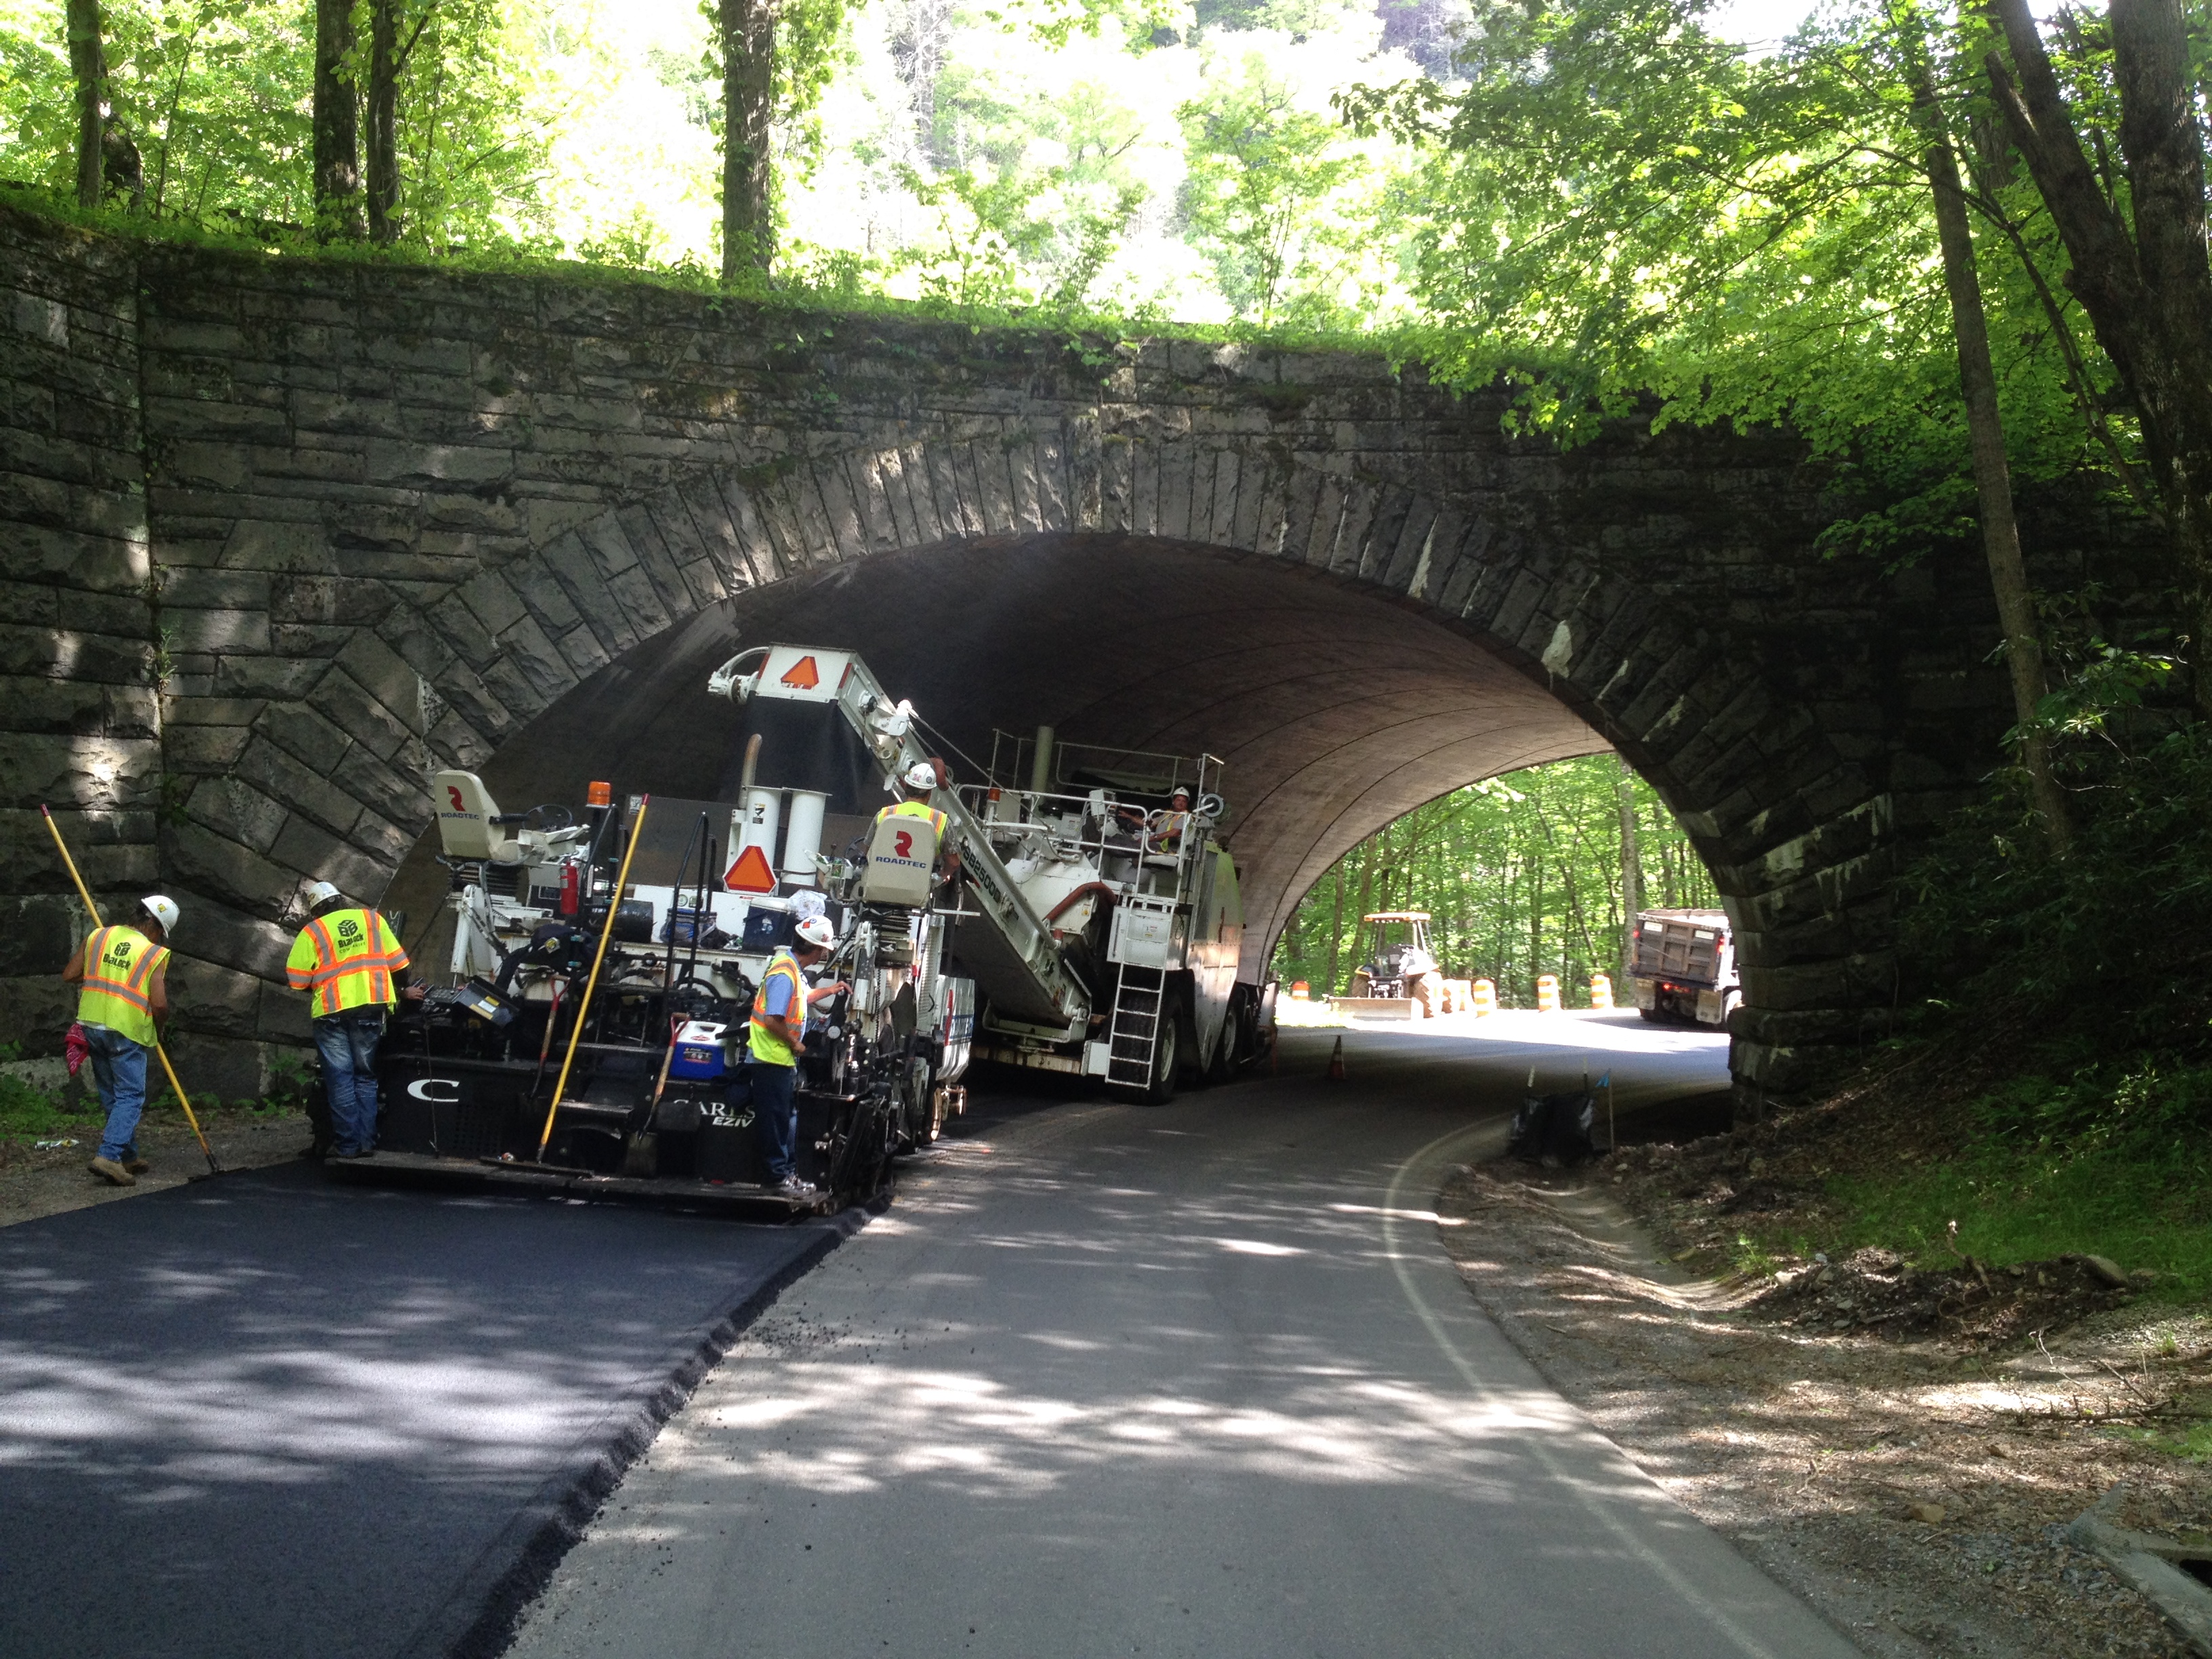 Road crew paves a road just before a stone bridge overpass.